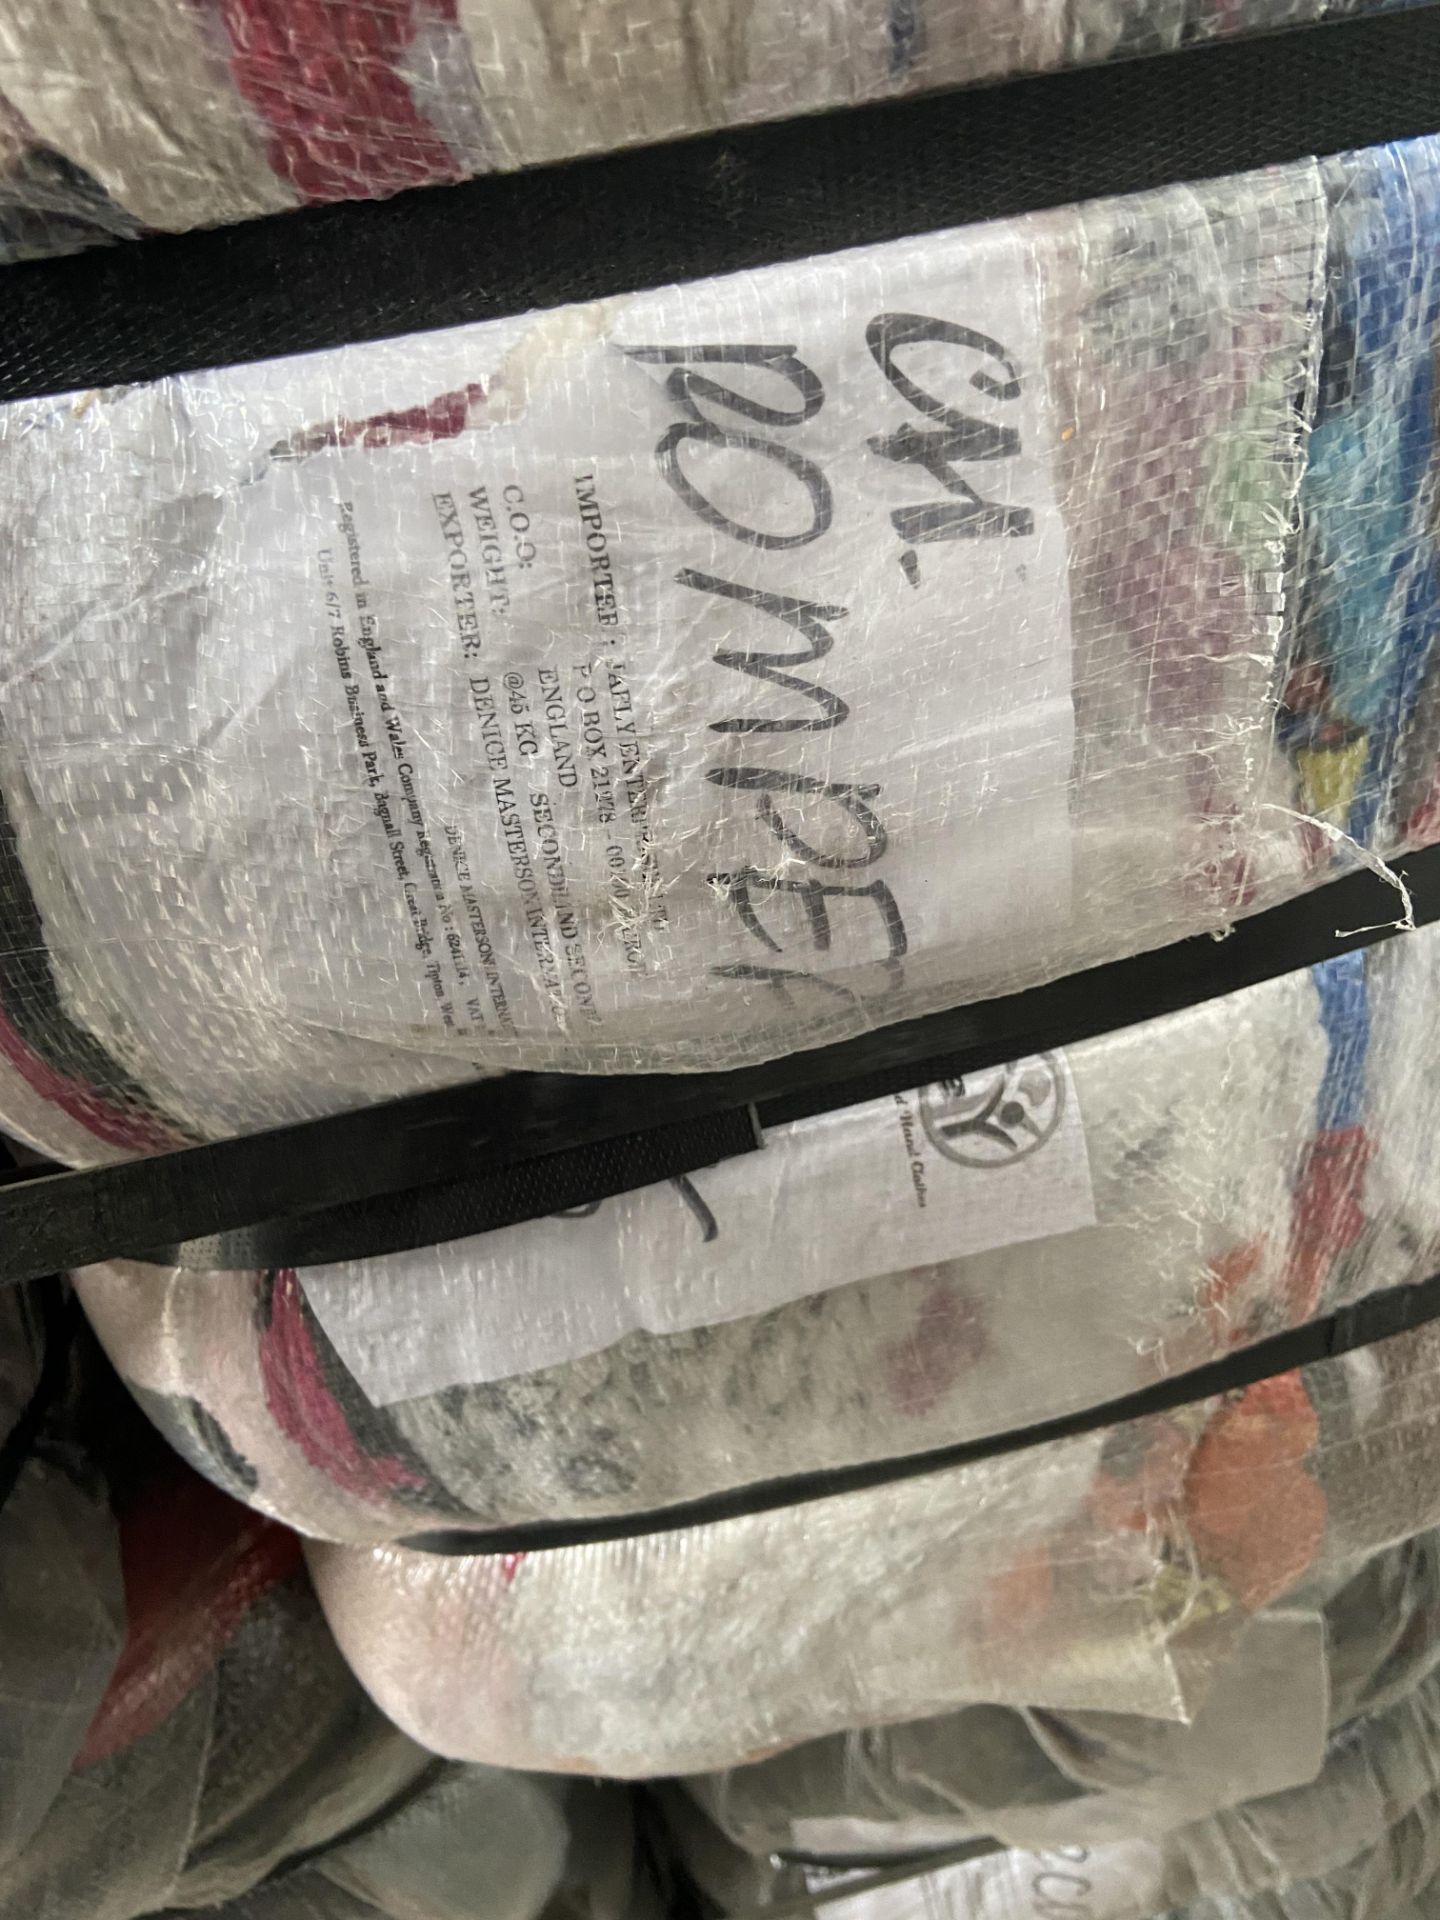 APPROX 197 BALES (8865KG) RECYCLABLE WASTE TEXTILES, understood to comprise: Three bales x 45kg - Bild 6 aus 8